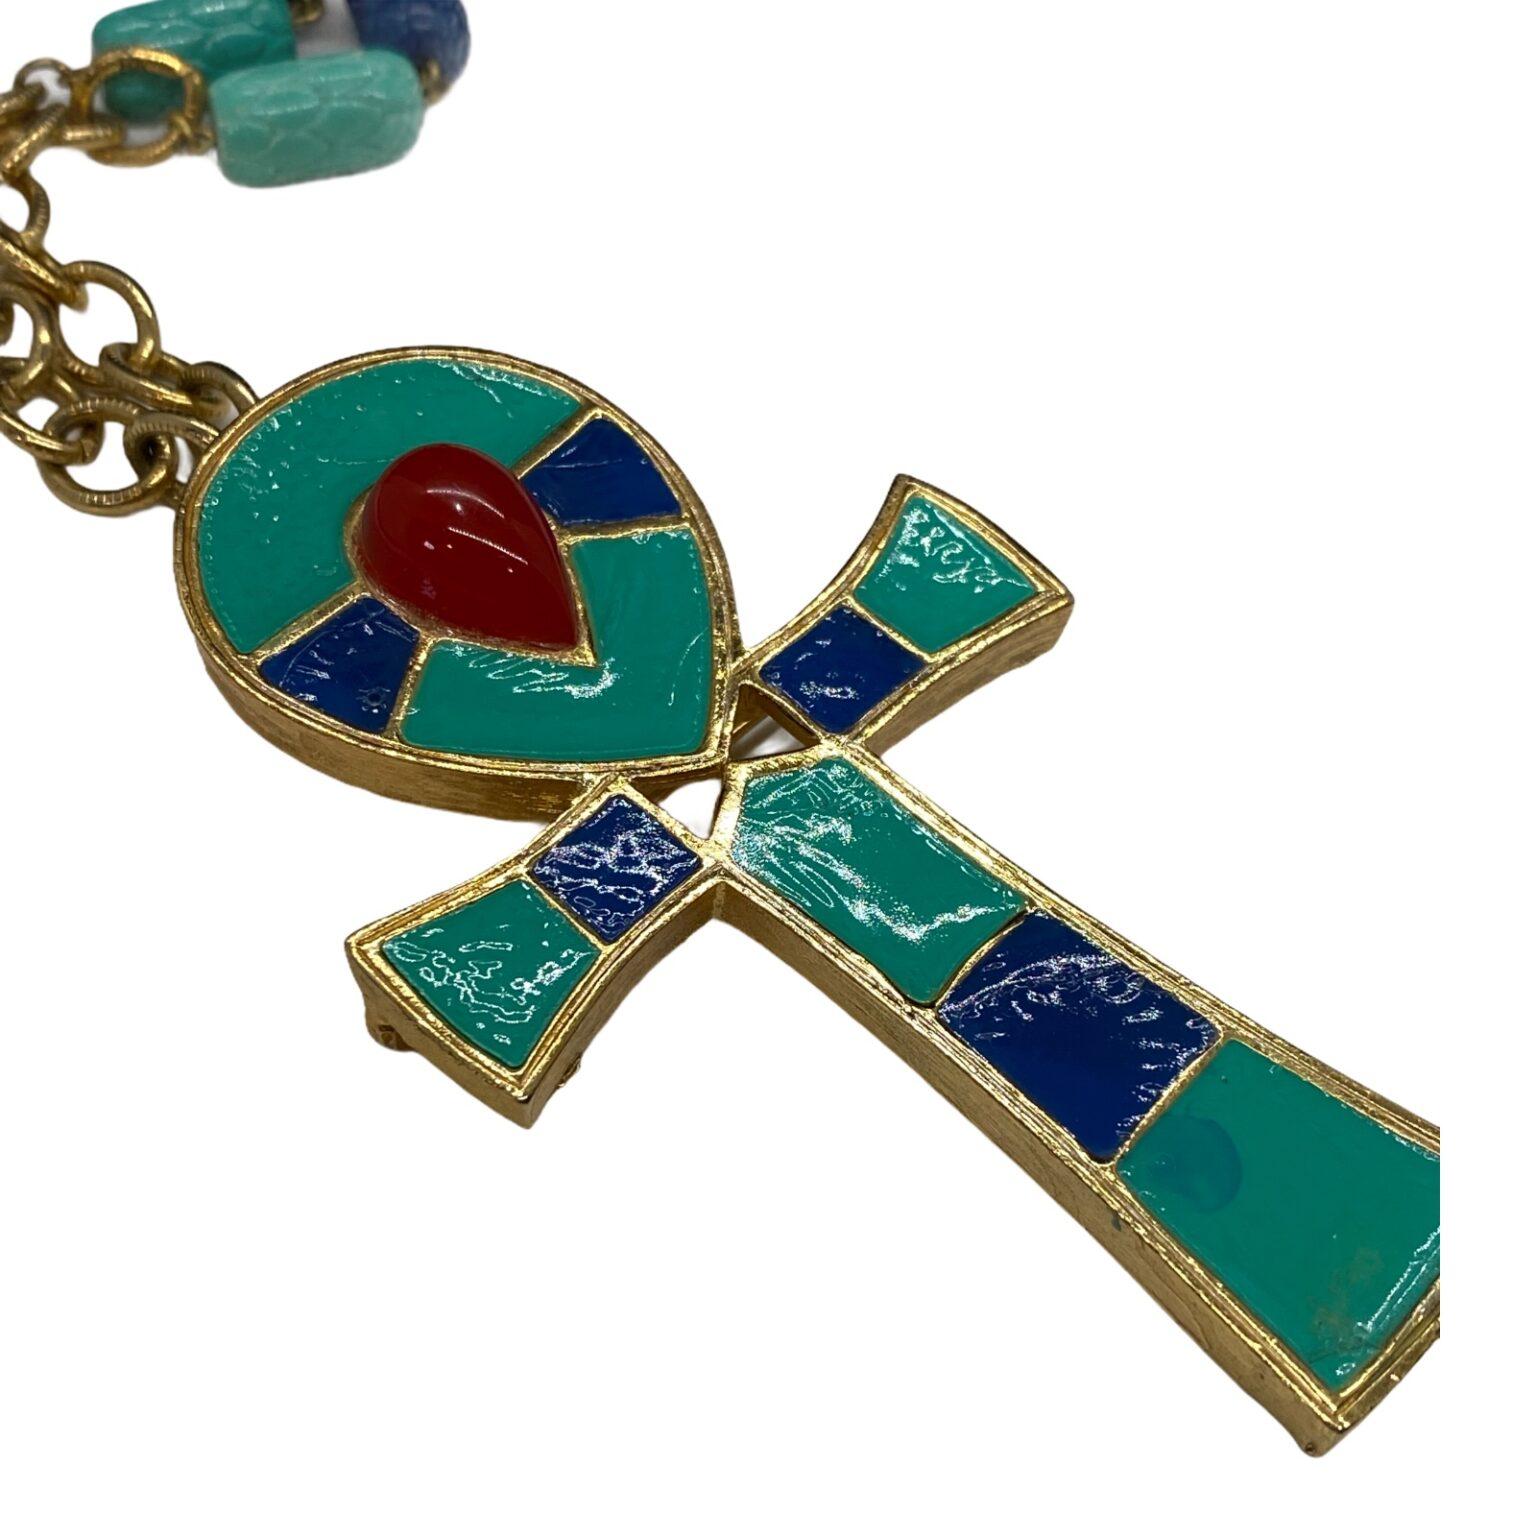 Hattie Carnegie Egyptian Revival Ankh Necklace with pendant-brooch